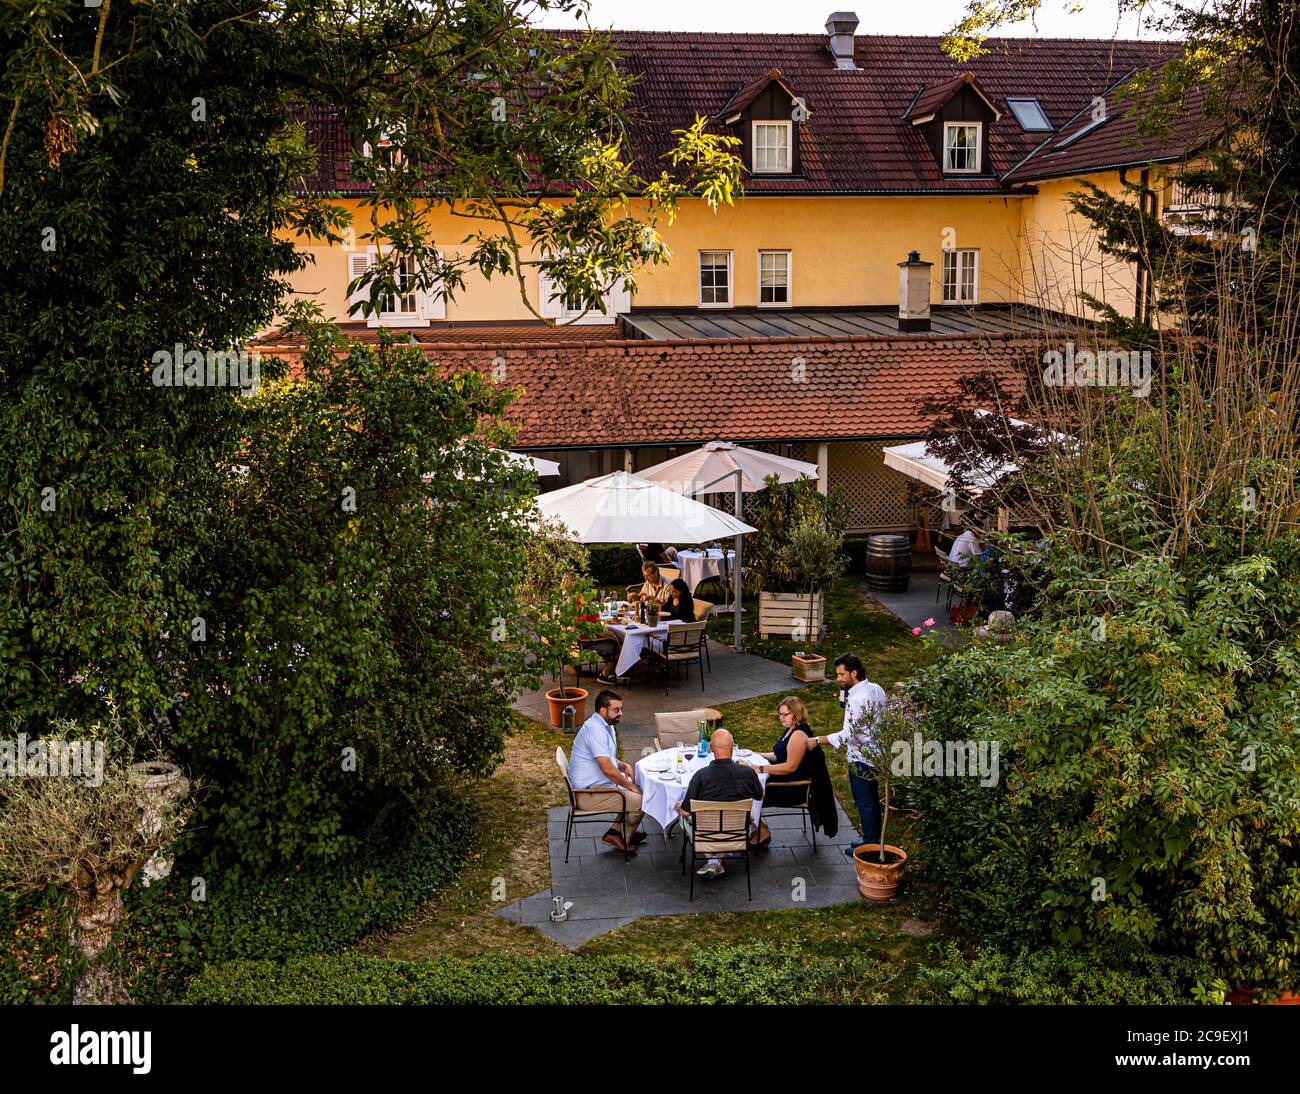 Outdoor catering in Hotel Mühle in Binzen, Germany. Idyllic garden with space for seating groups. Discreet transformation to more Italian Dolce Vita are planned in the Hotel Mühle and Restaurant La Cucina Stock Photo